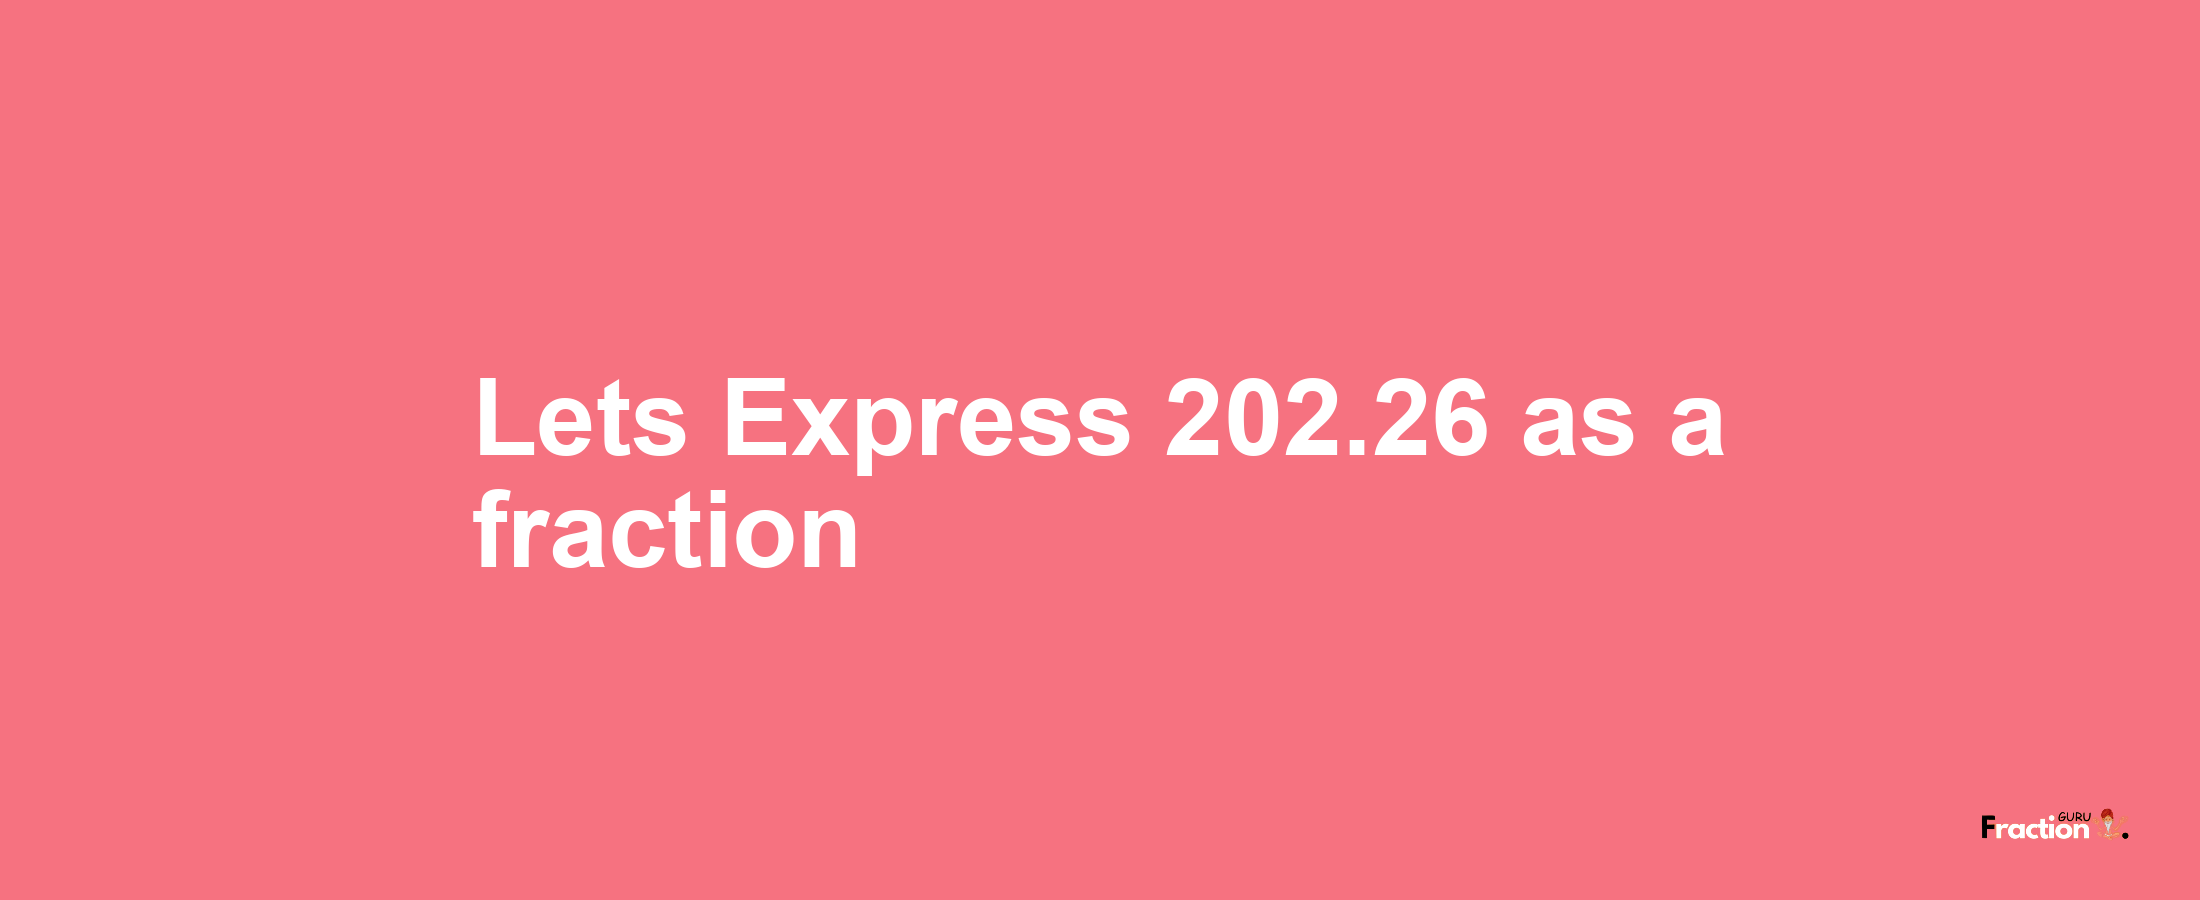 Lets Express 202.26 as afraction